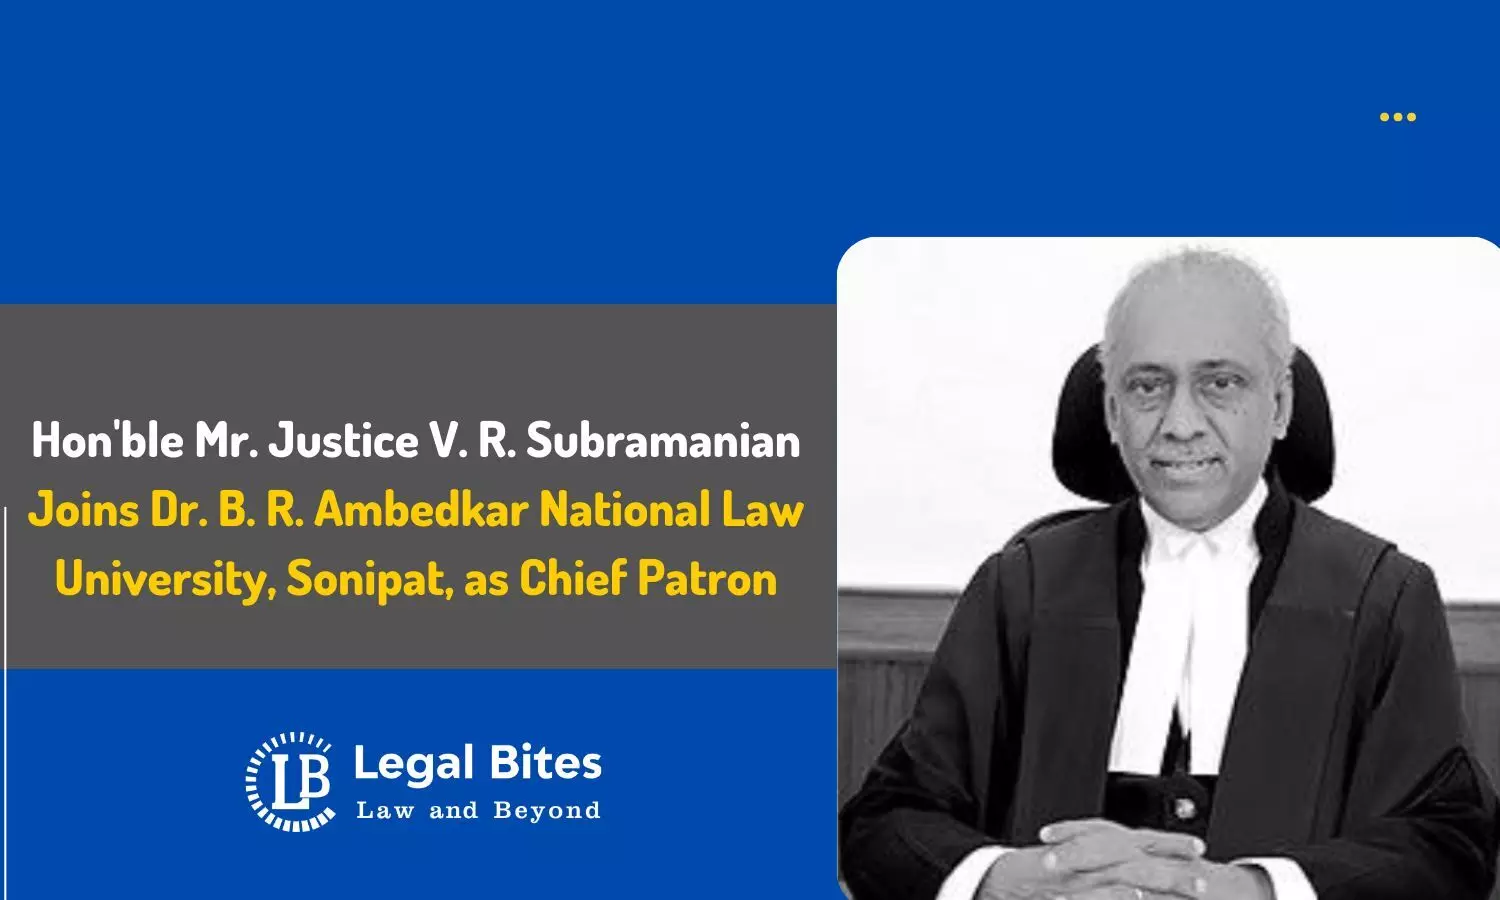 Hon’ble Mr. Justice V. R. Subramanian Joins as Chief Patron at NLU Sonipat in the Centre  of Conflict Management & Dispute Resolution (CCMDR)